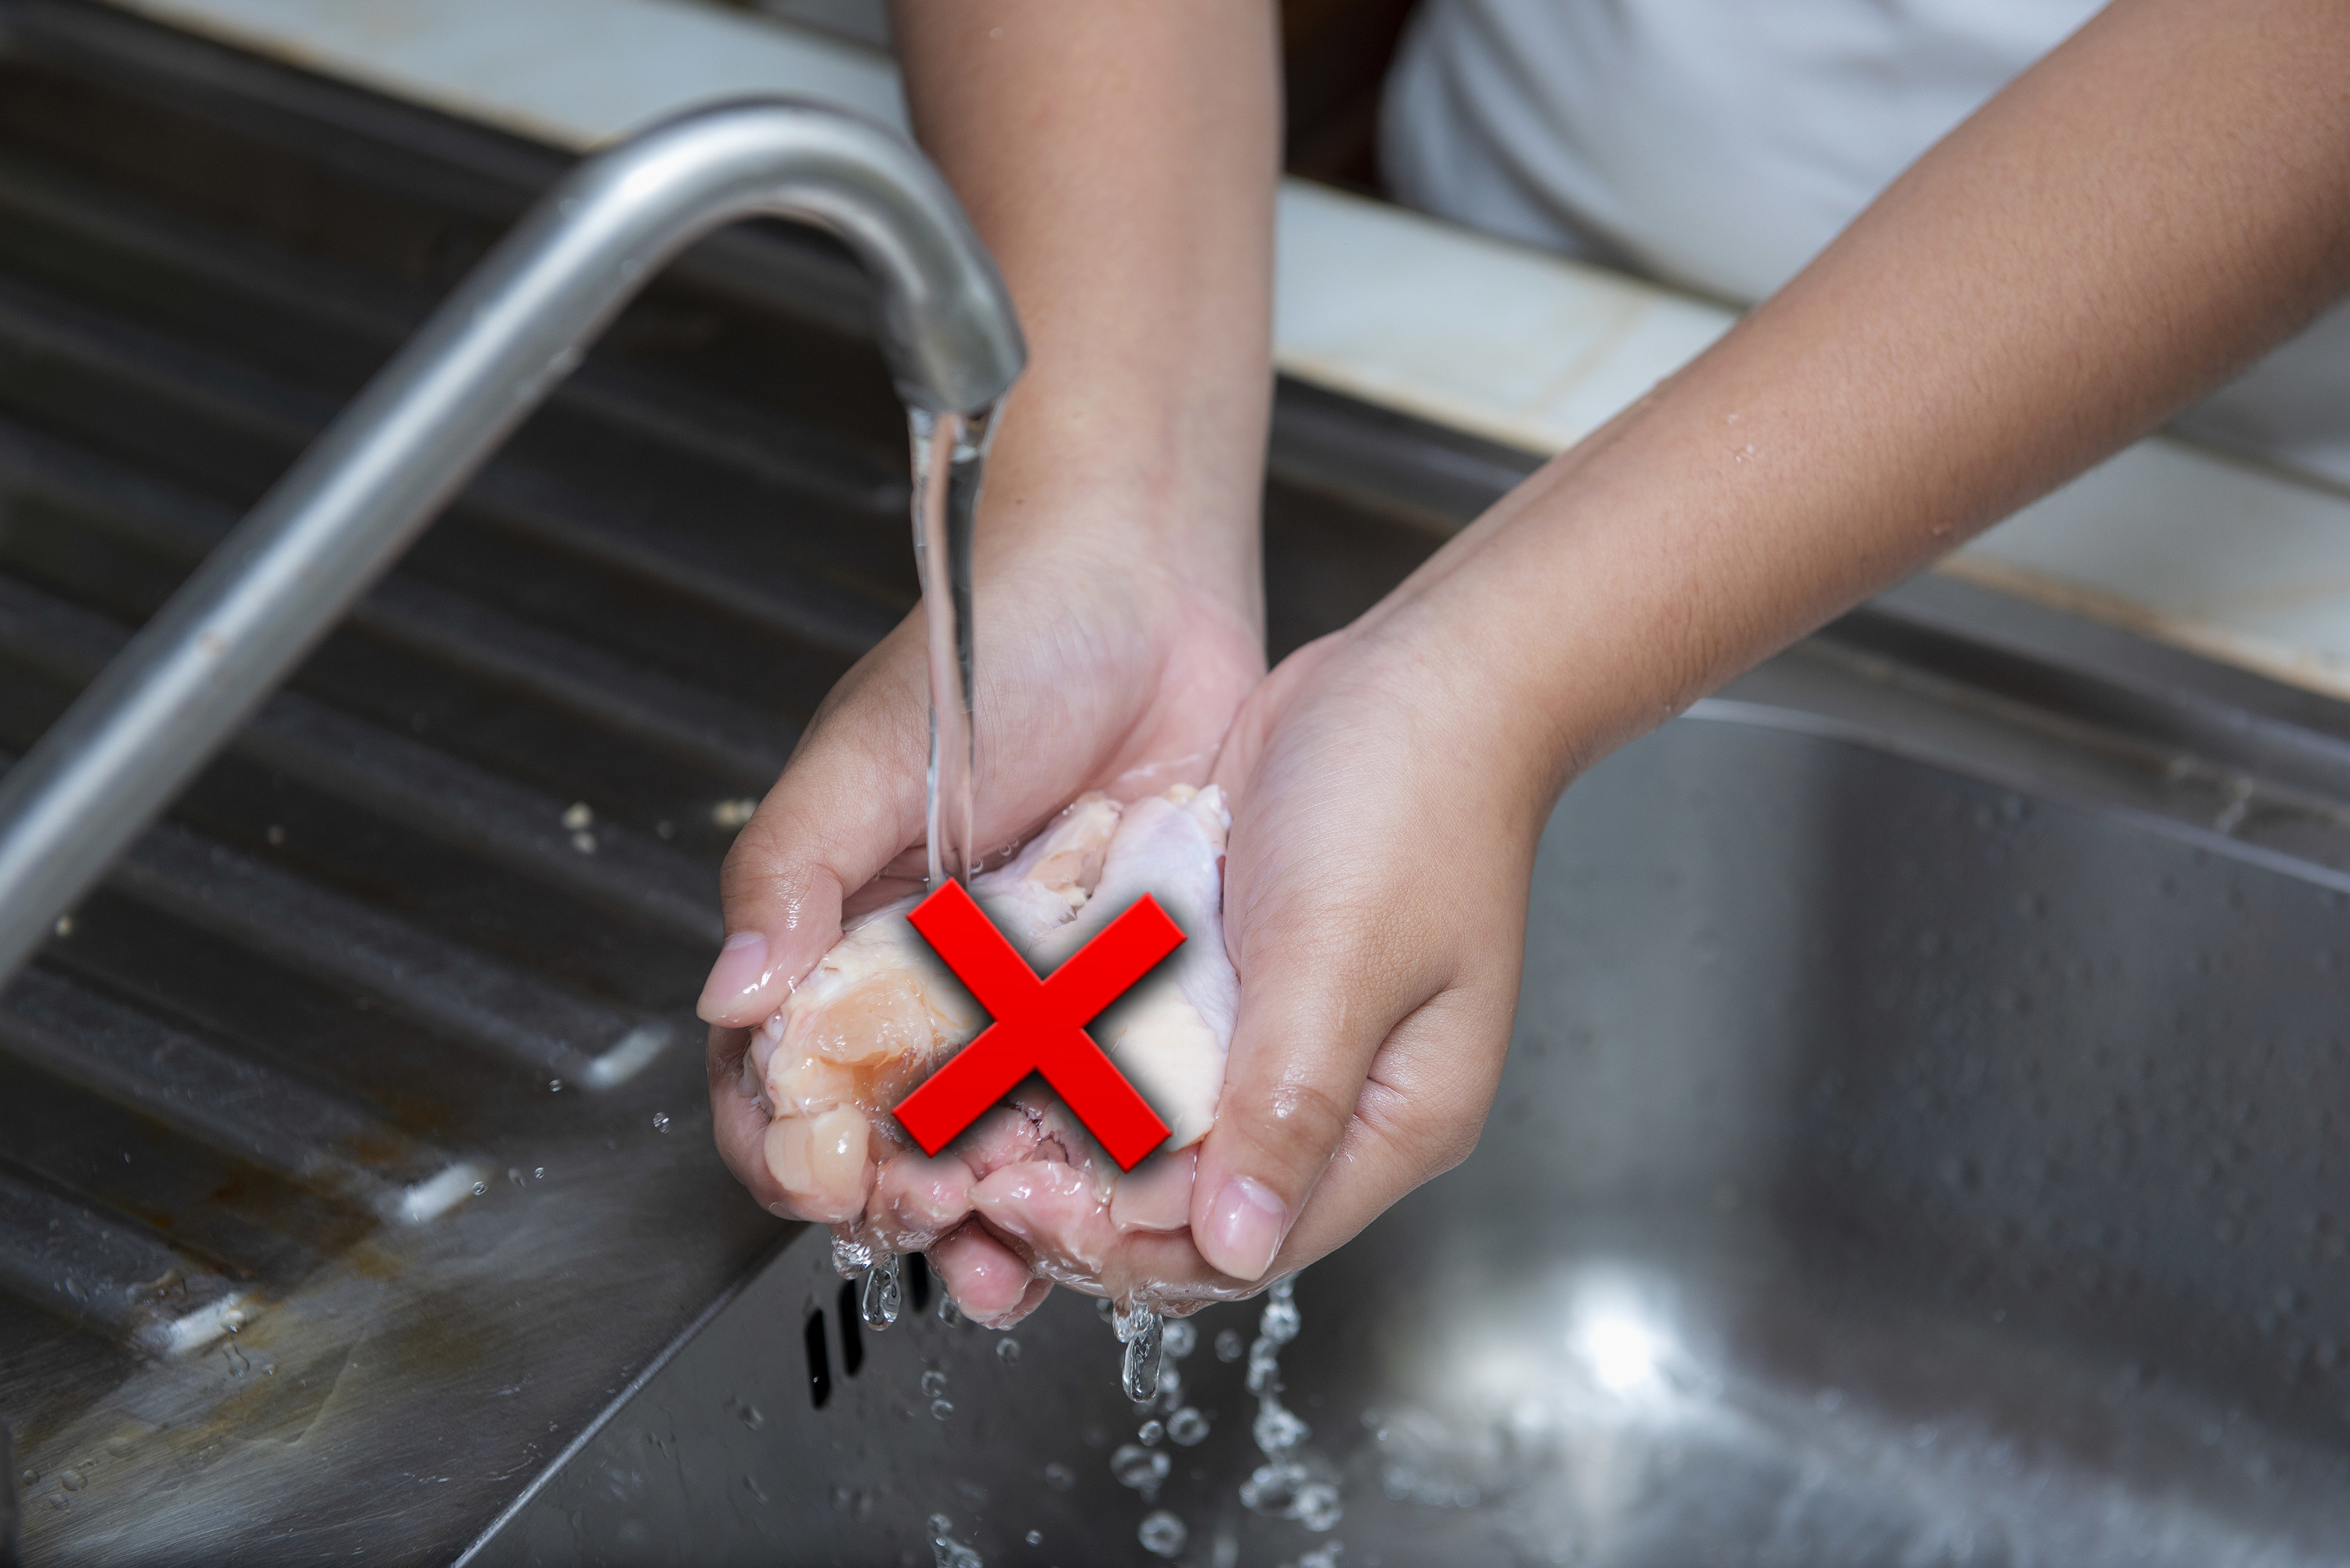 Rinsing chicken under a kitchen faucet with an X over it